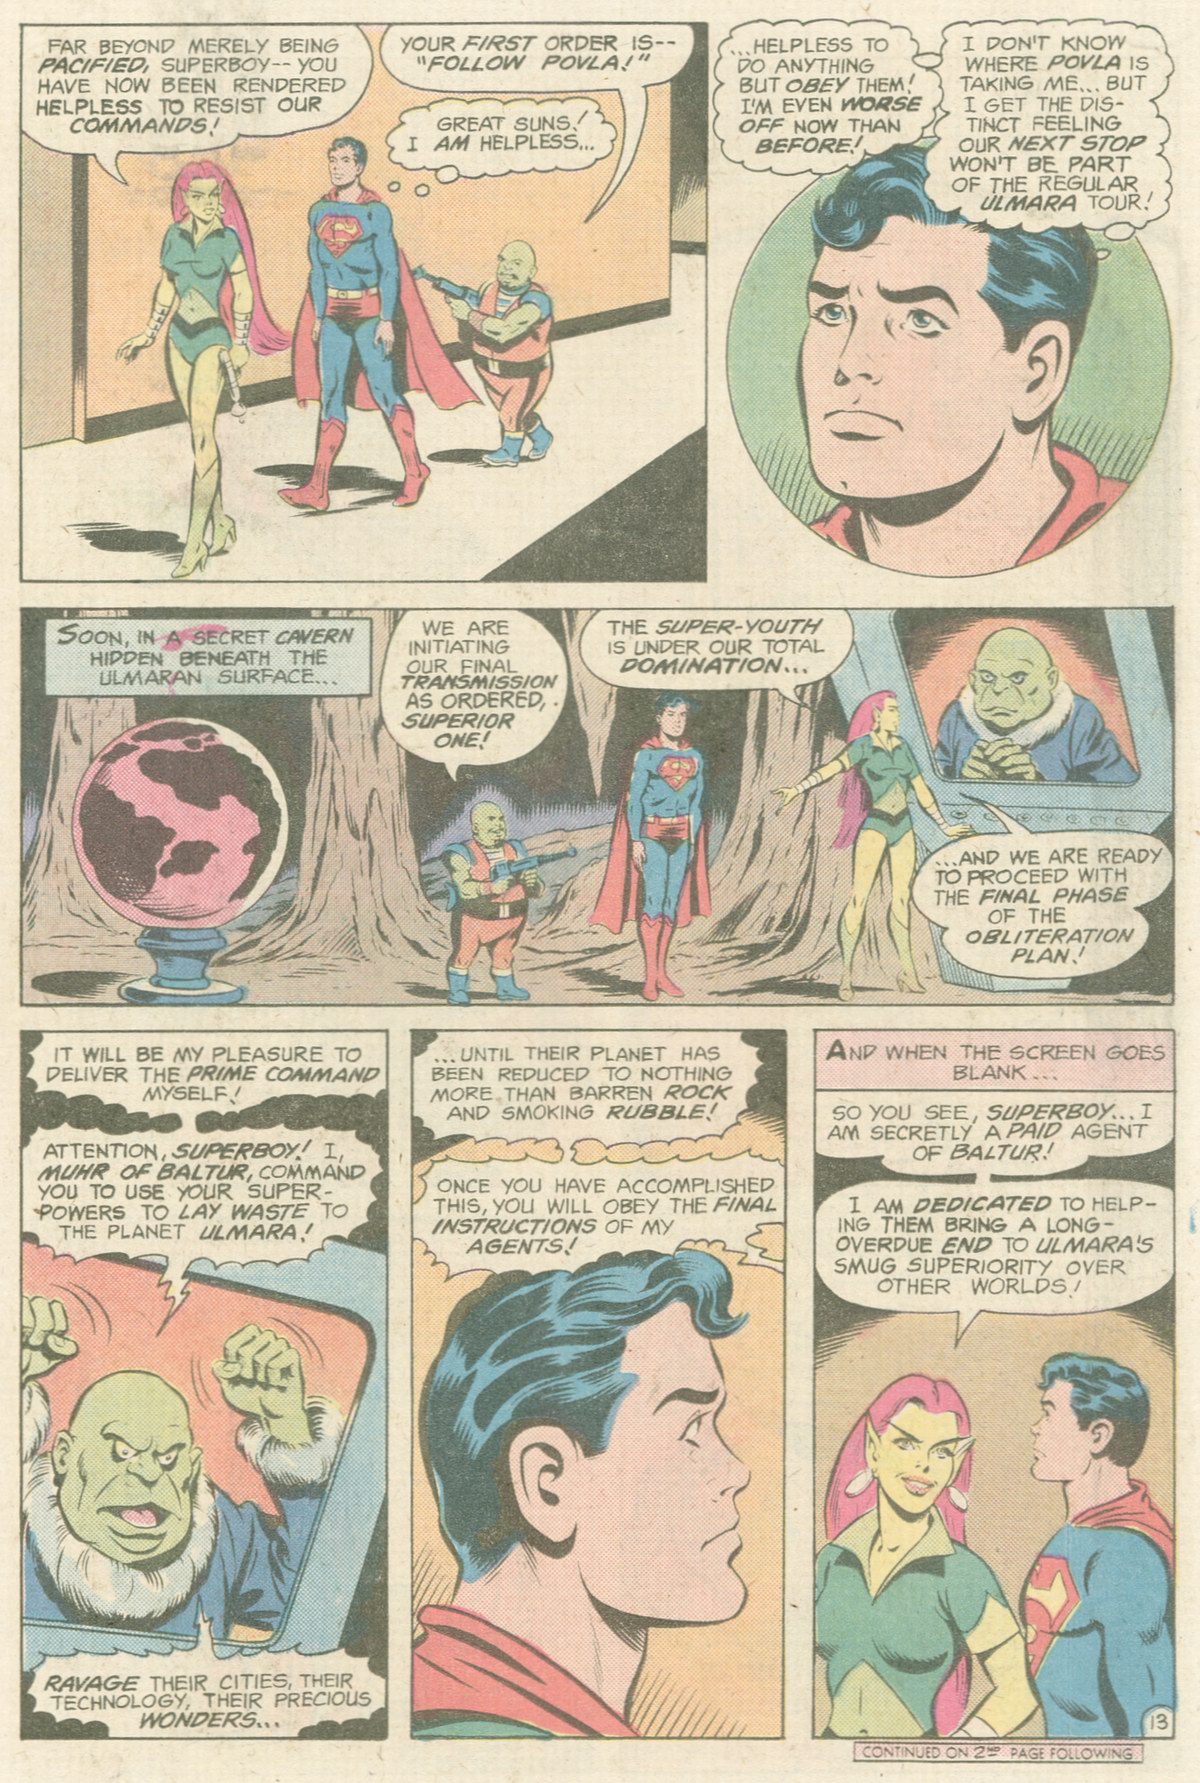 The New Adventures of Superboy 20 Page 13